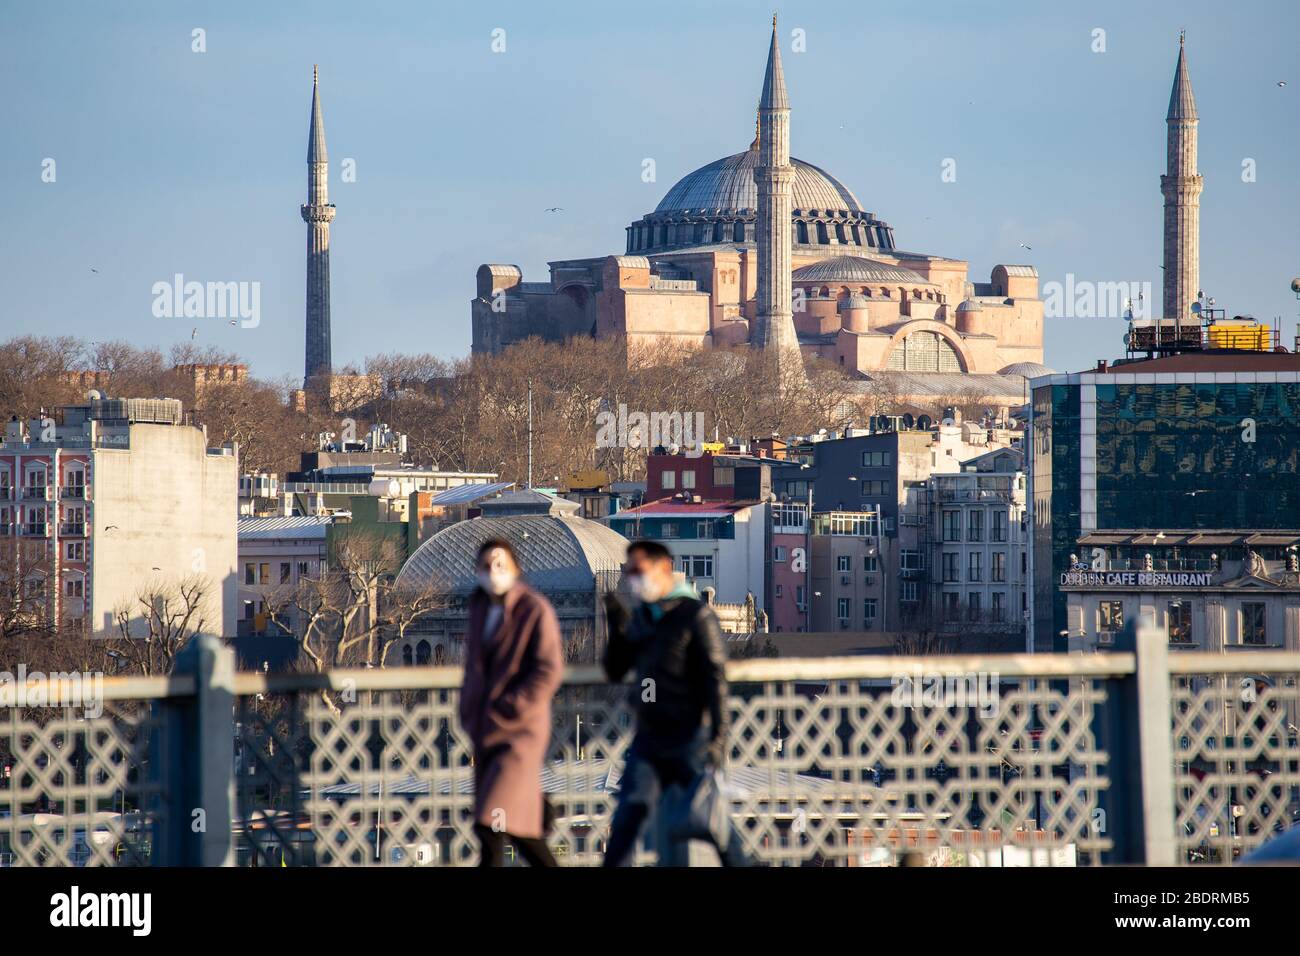 View from the empty Galata Bridge, famous for anglers. Istanbul Metropolitan Municipality banned fishing within its borders. Stock Photo